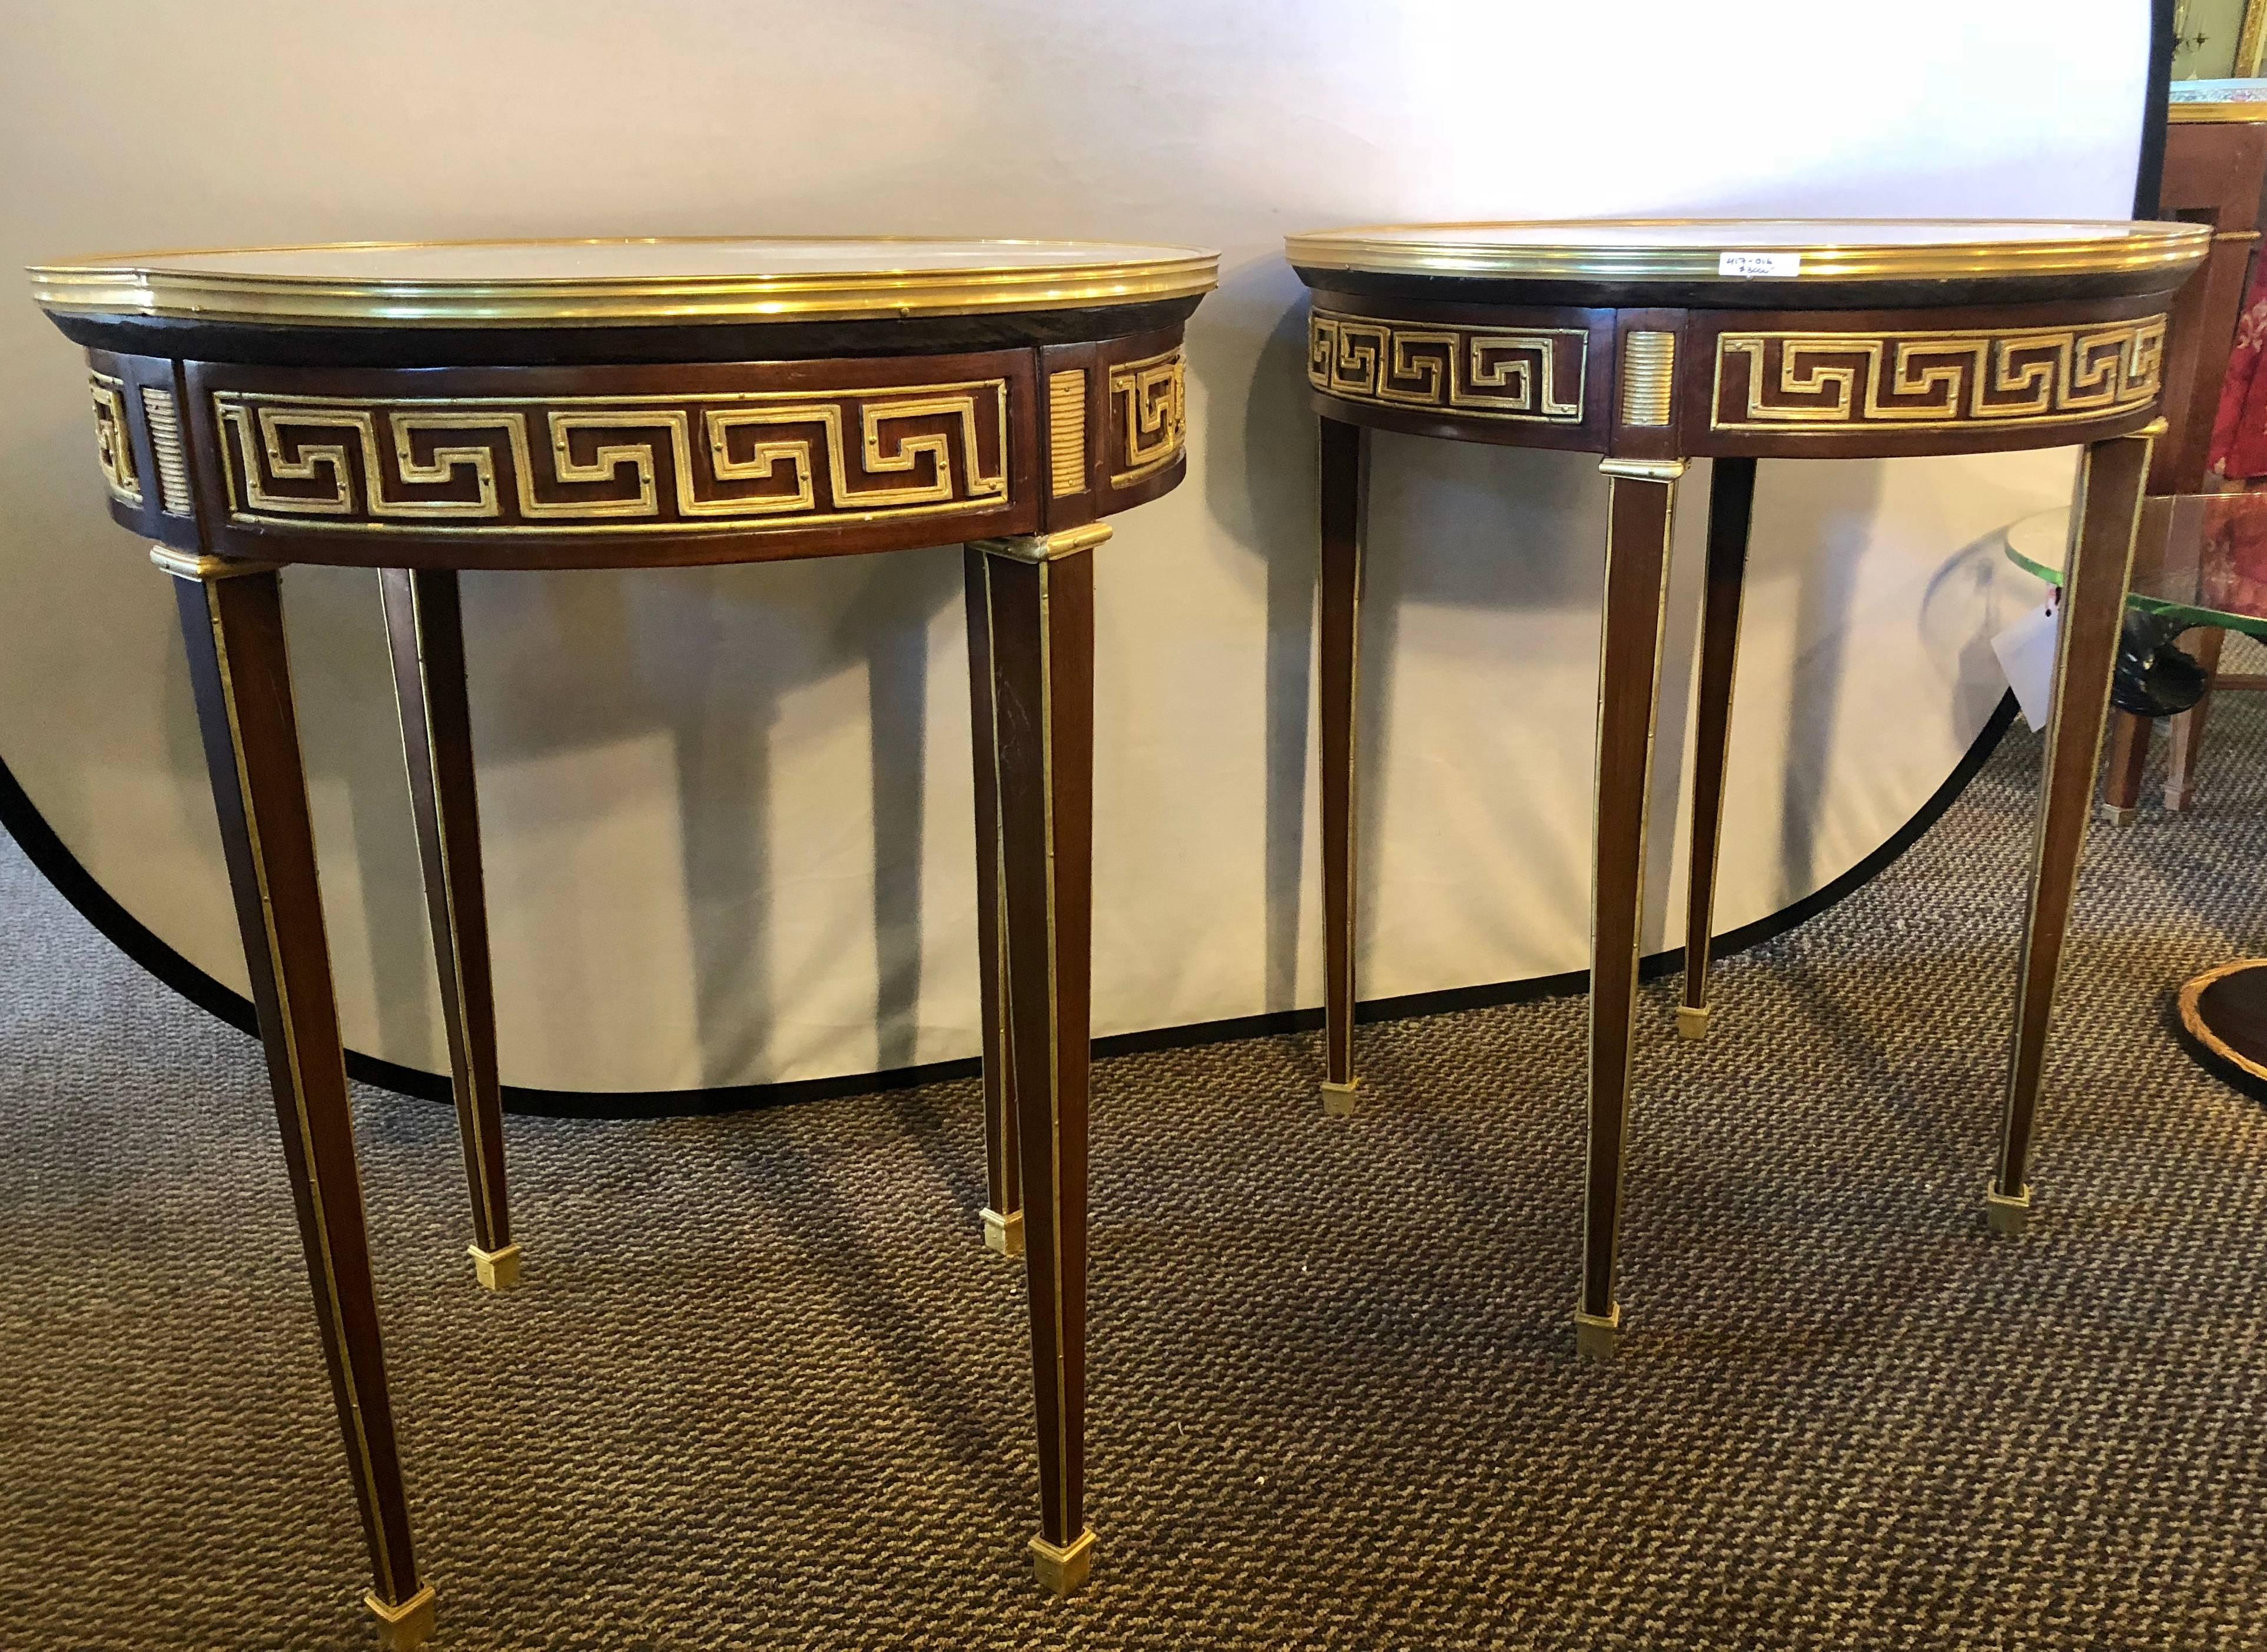 Pair of Greek key designed bronze galleried marble top mahogany Bouillotte or pedestal tables. These are simply the most stunning pair of Hollywood Regency style end tables or pedestals on the market. The tapering legs having bronze sabots with